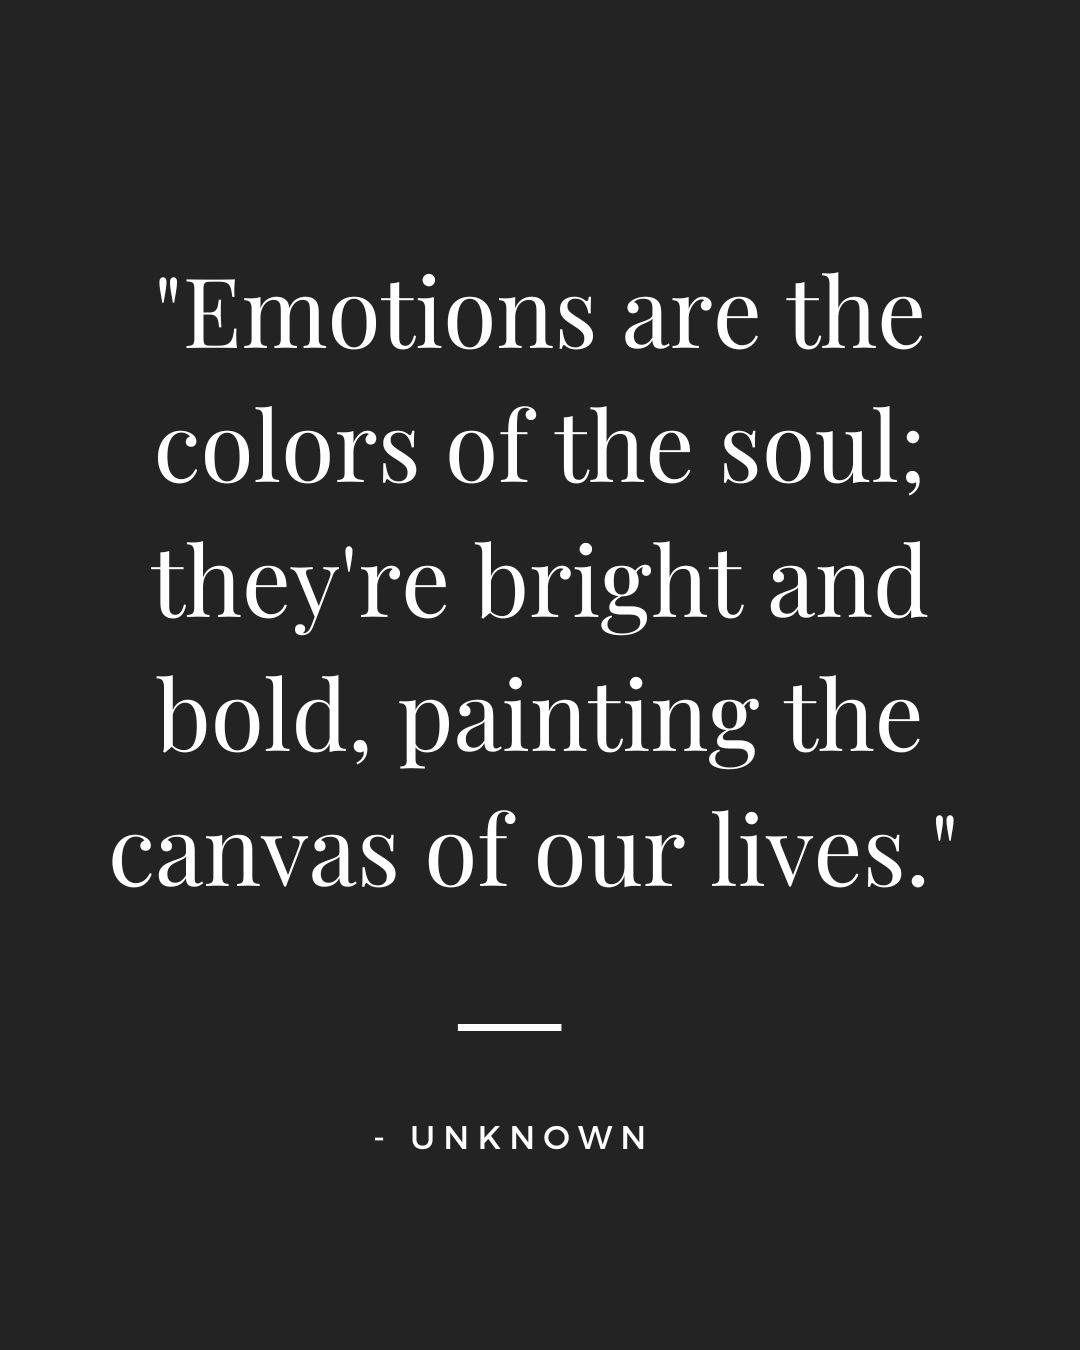 Quotes on Emotions